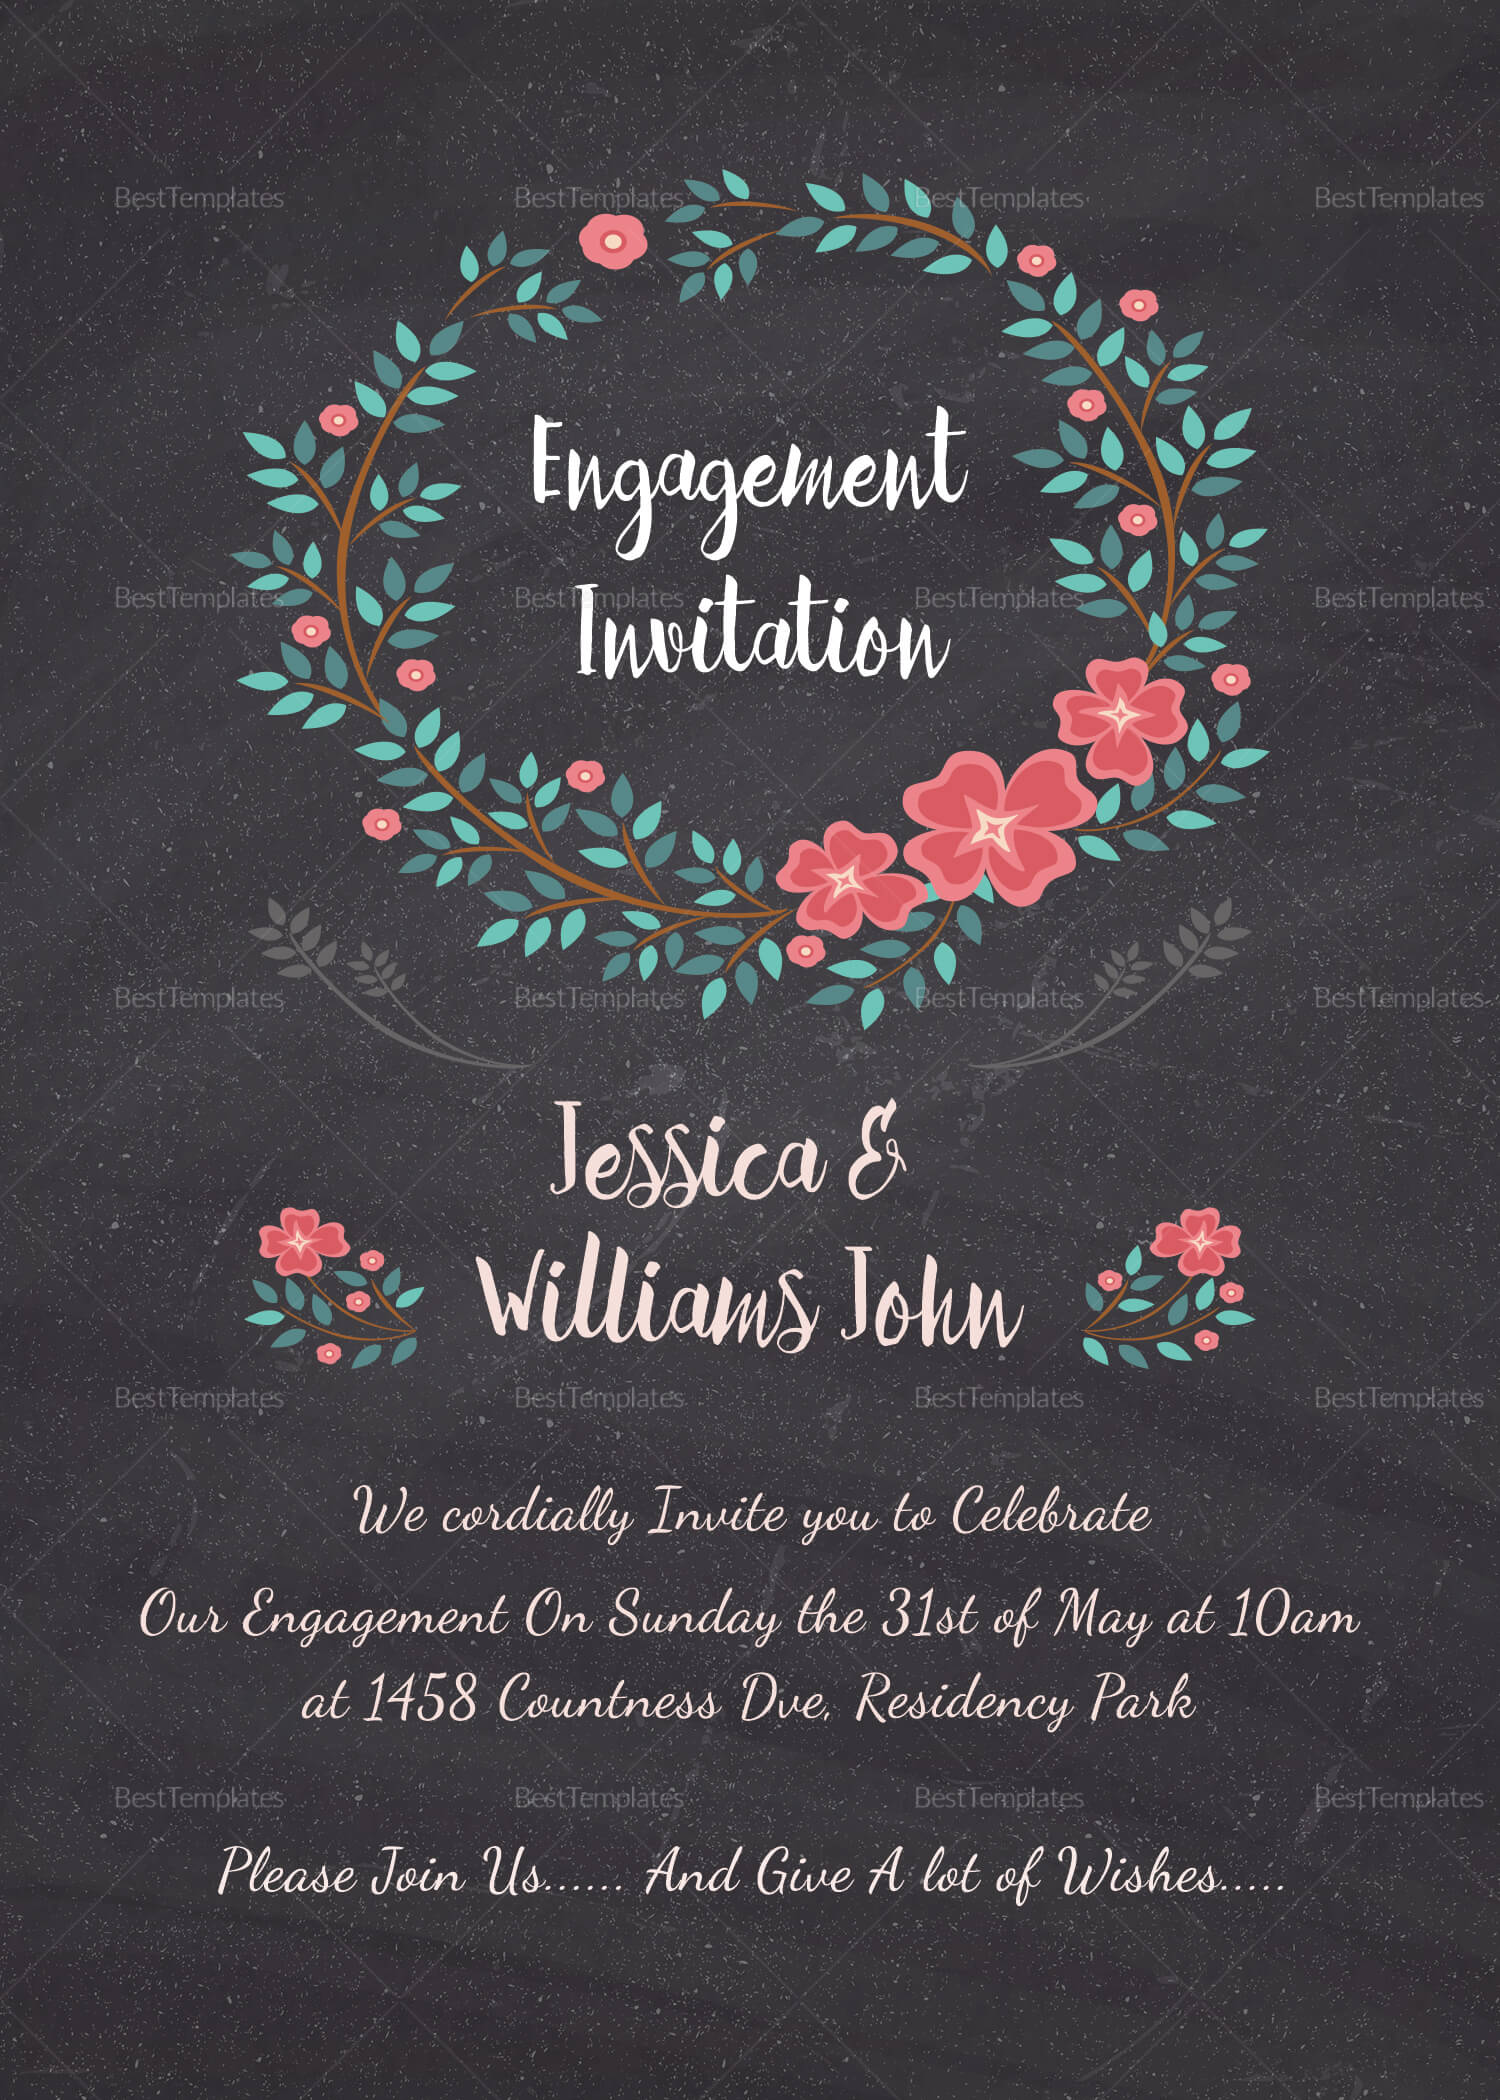 Engagement Invitation Card Template In Engagement Invitation Card Template